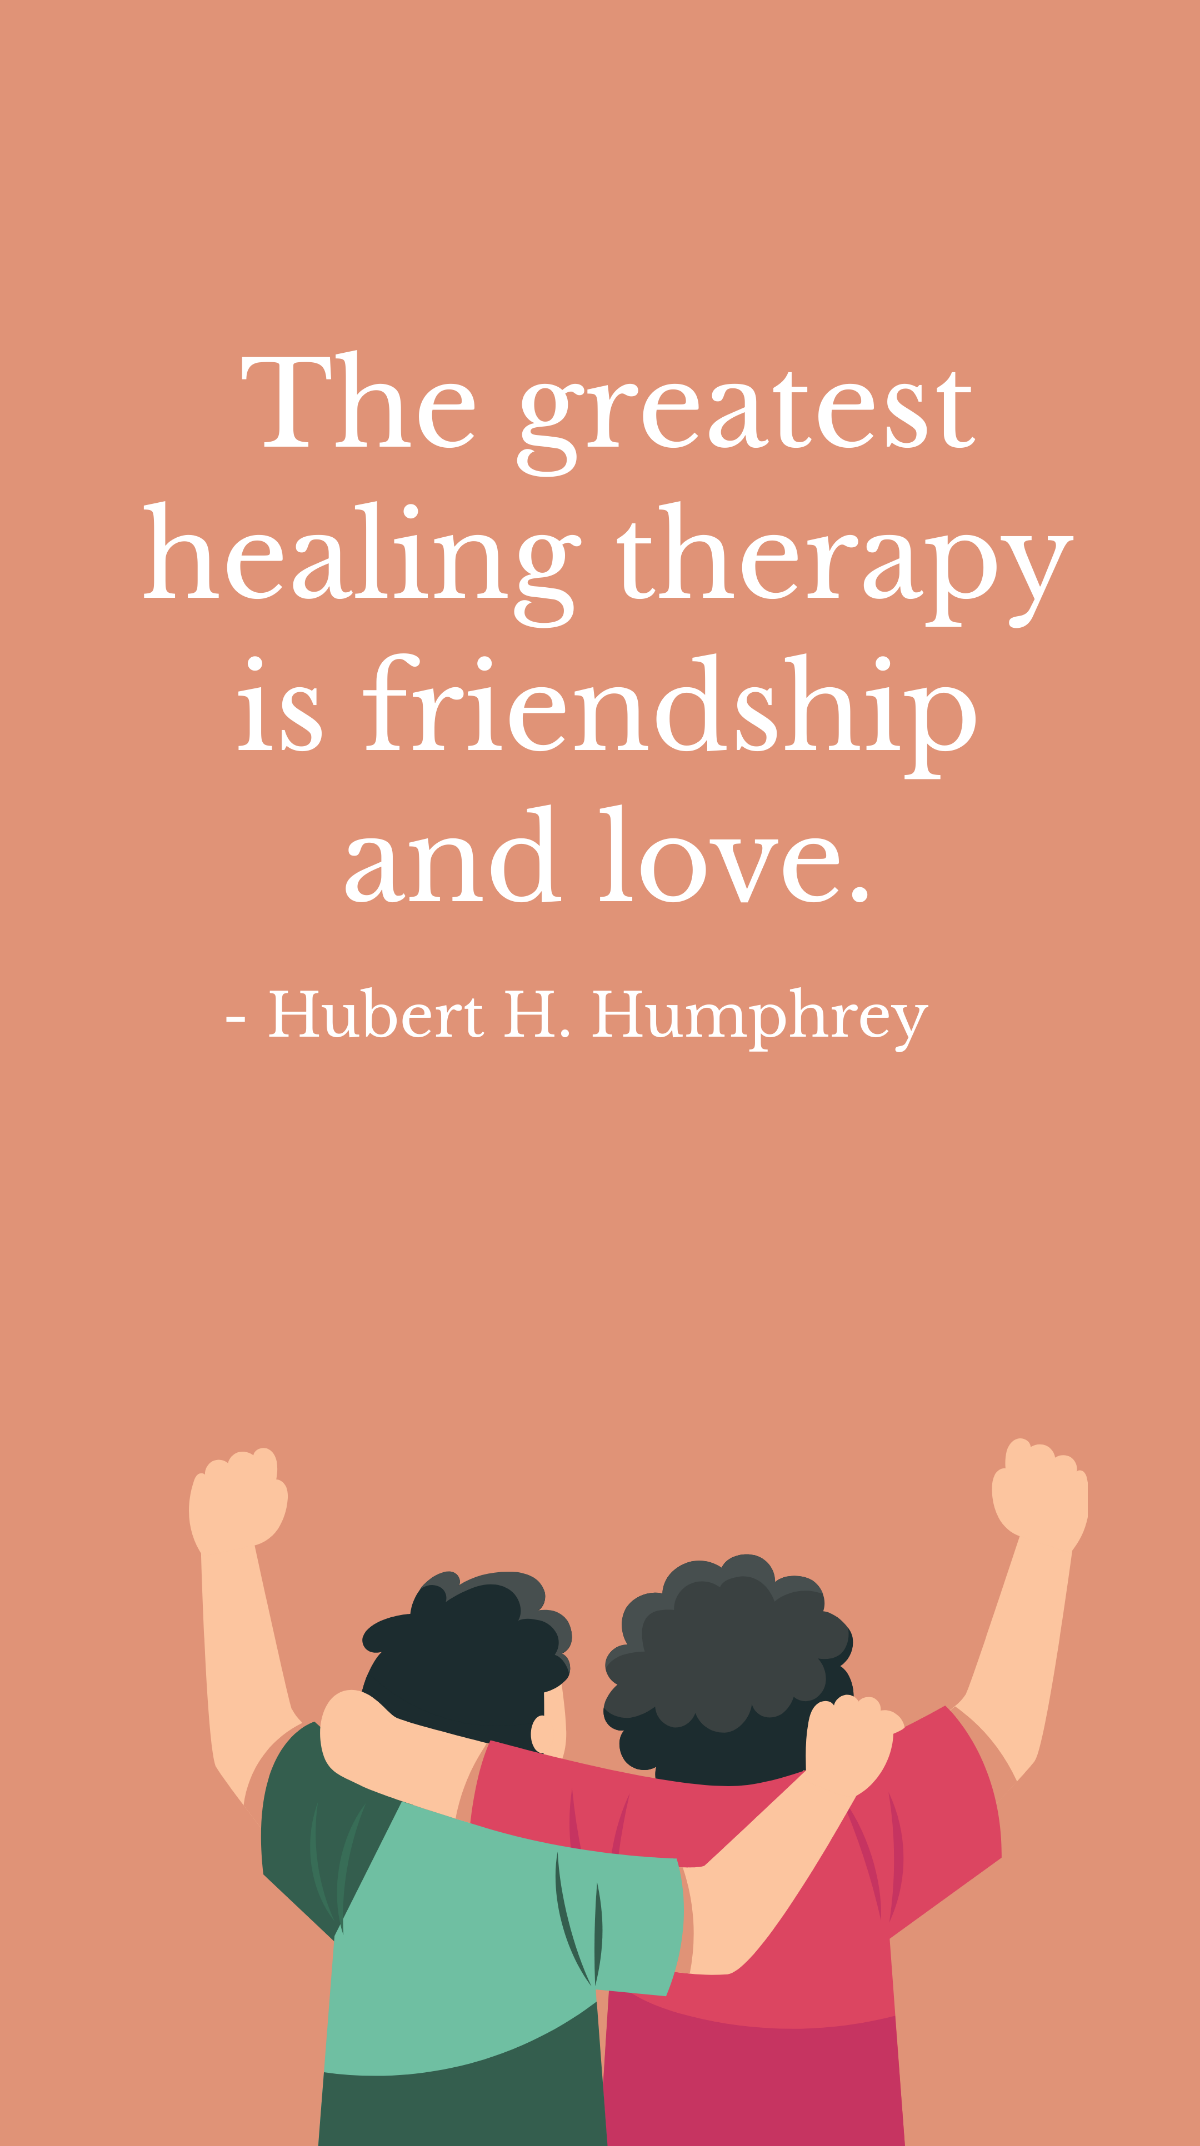 Free Hubert H. Humphrey - The greatest healing therapy is friendship and love. Template